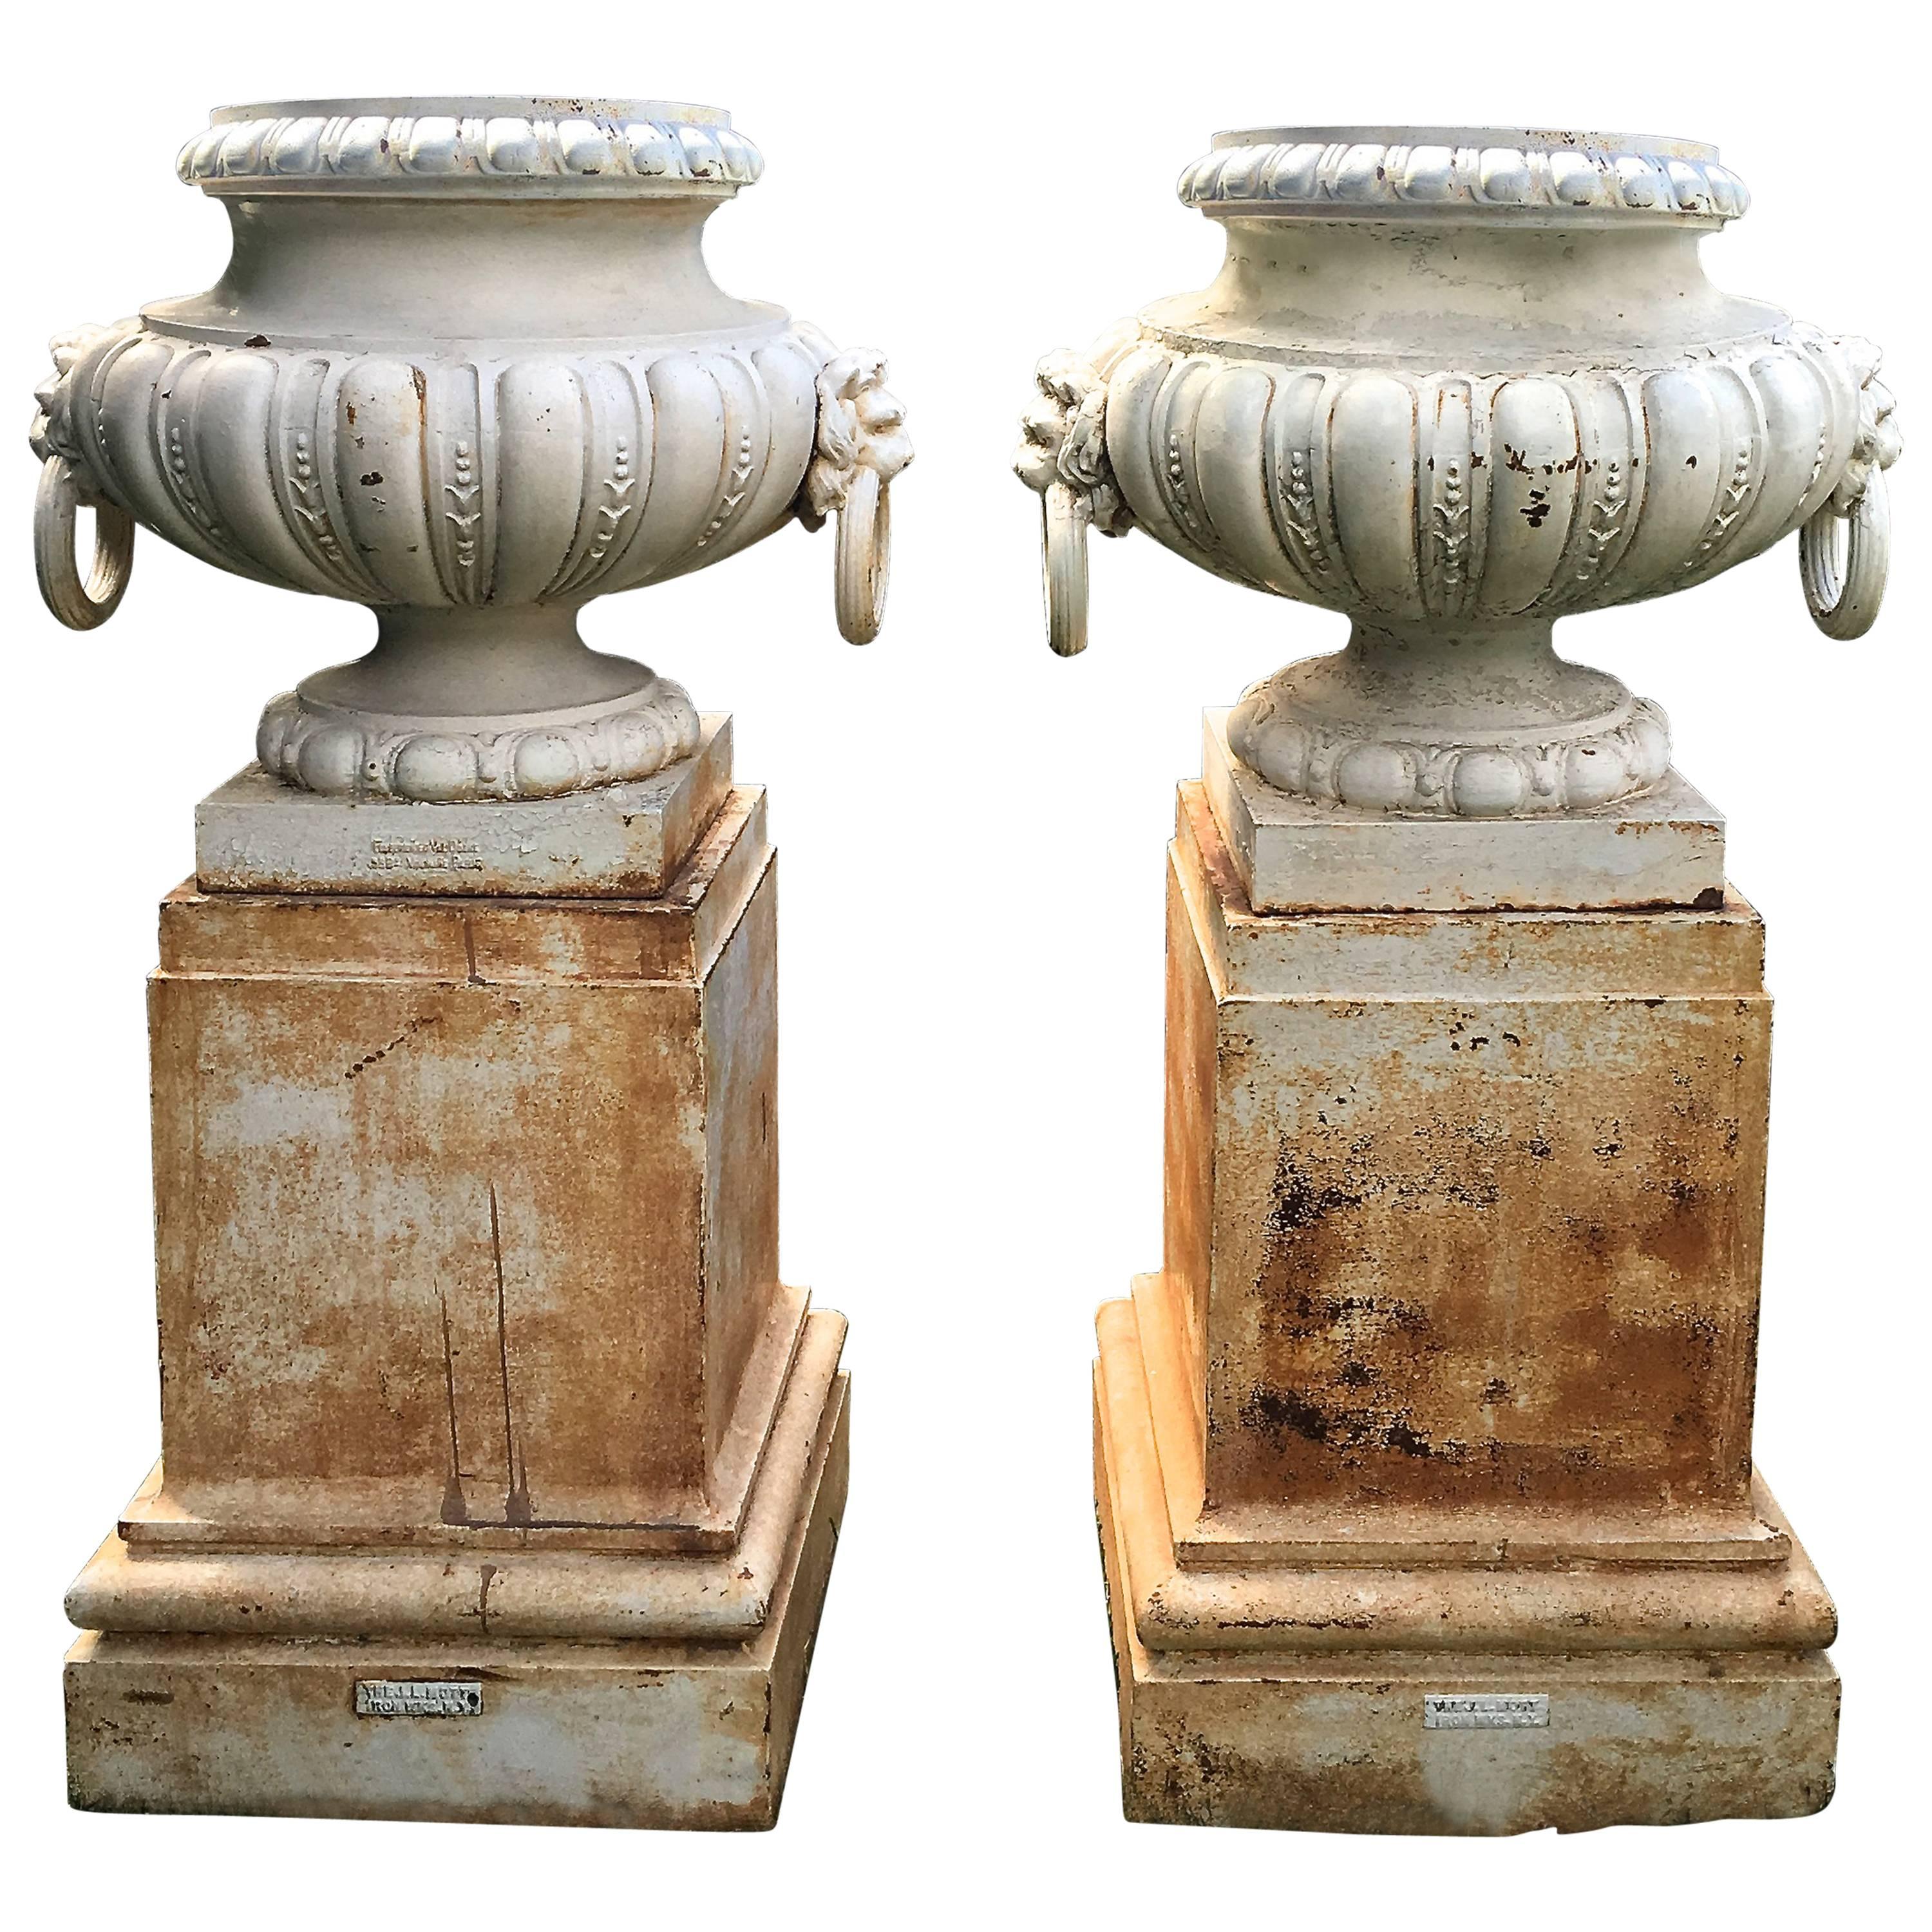 Pair of Rare Estate-Sized Val d'Osne Cast Iron Urns on Tall Plinths